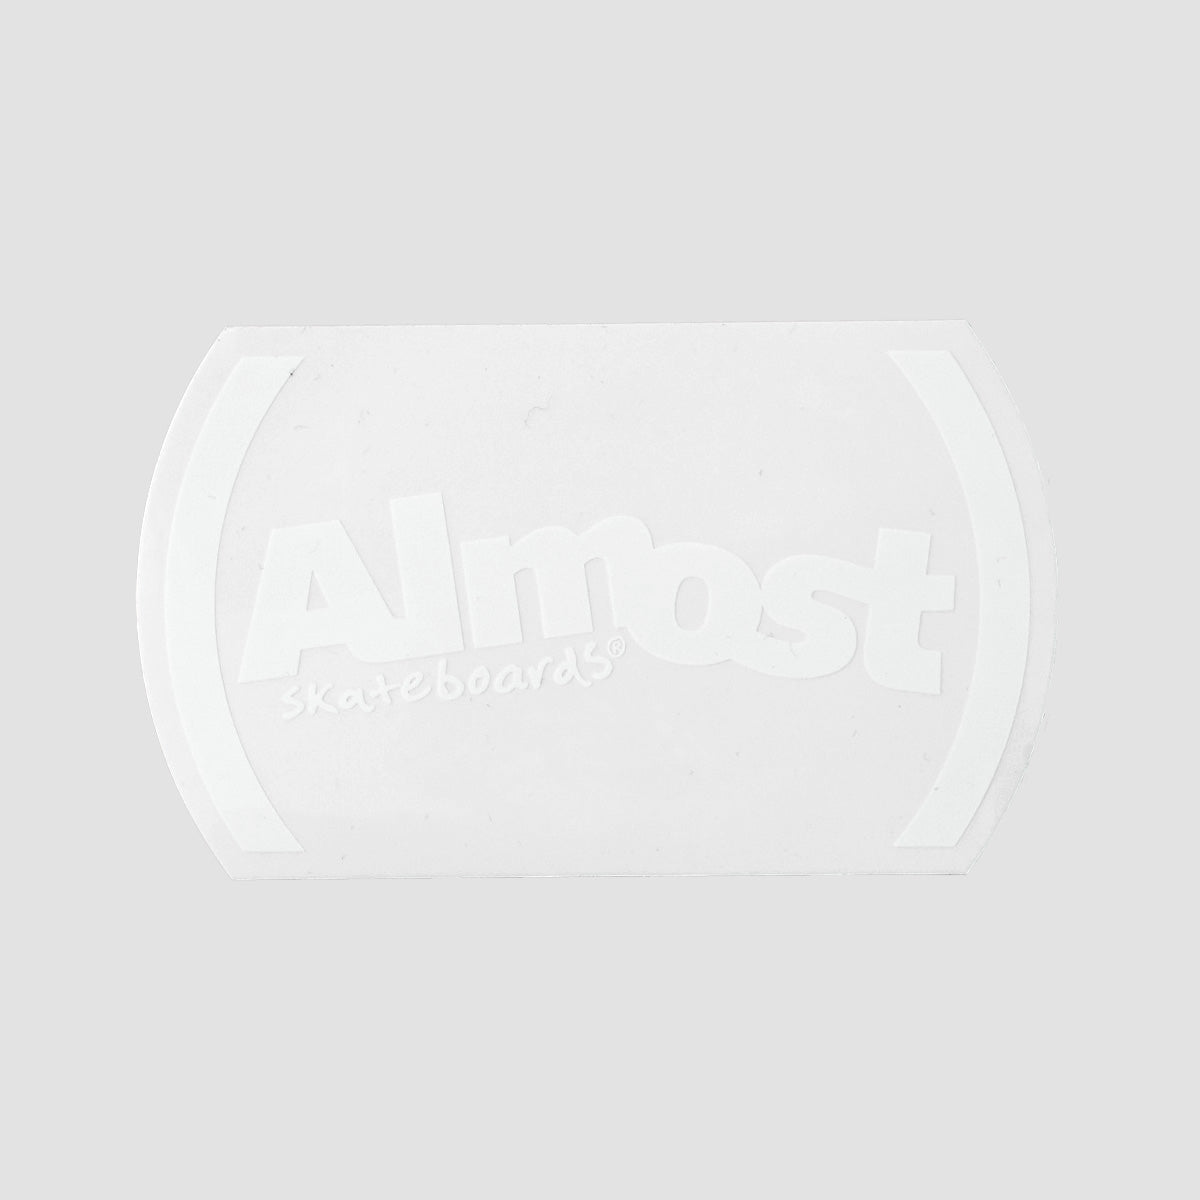 Almost Cropped Sticker Multi 100x60mm